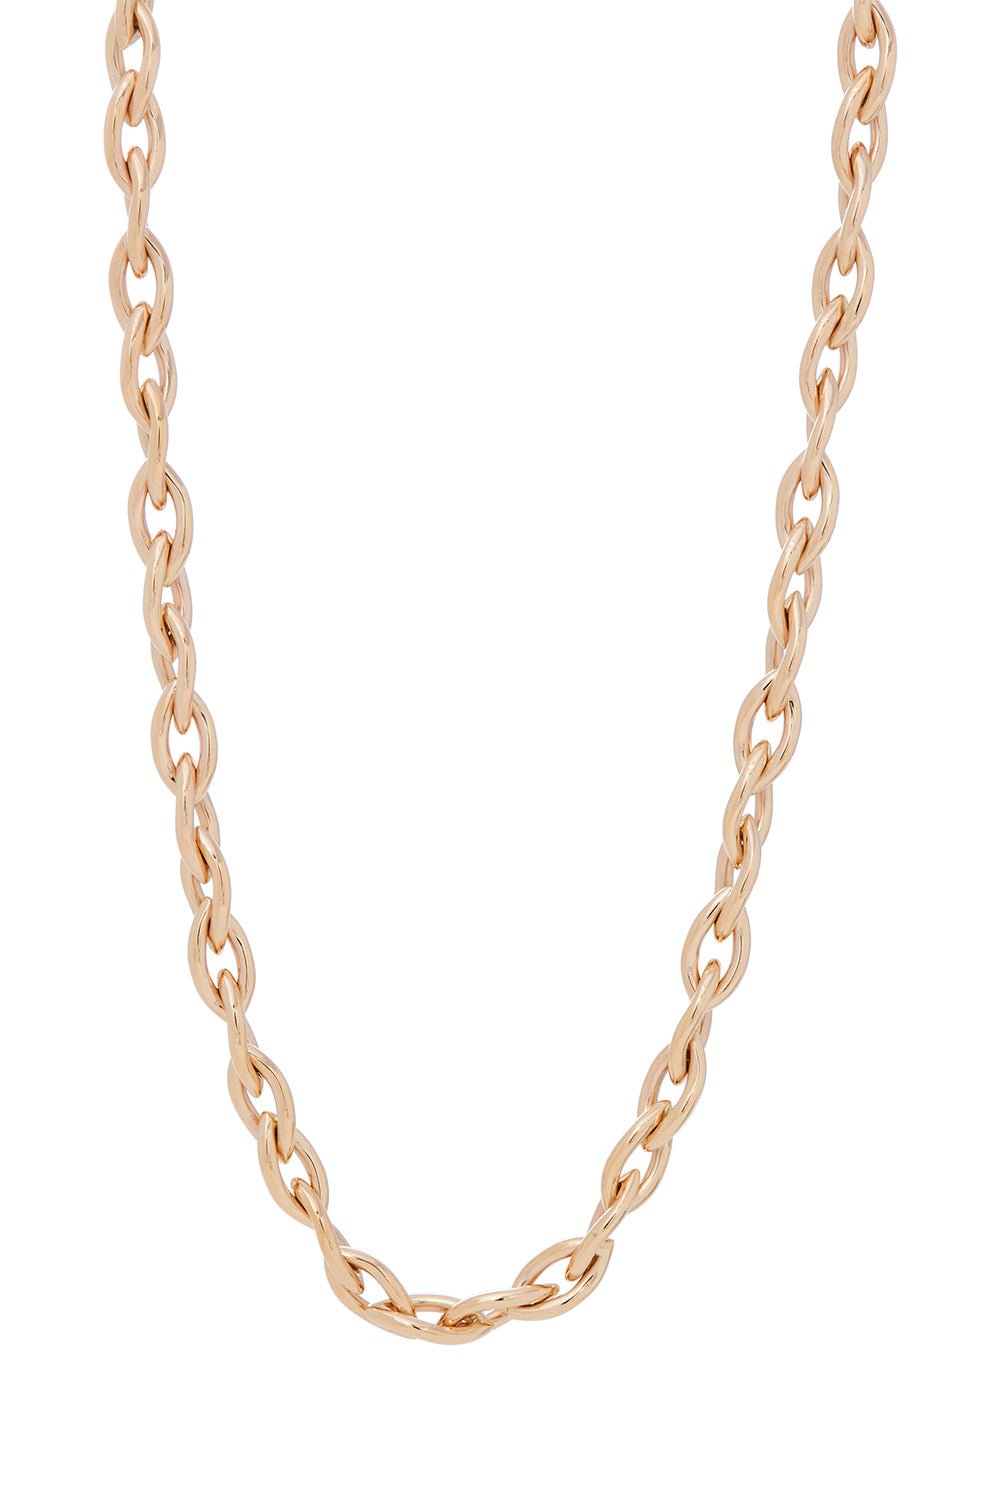 SIDNEY GARBER-Marquise Link Necklace - 16in - Yellow Gold-YELLOW GOLD